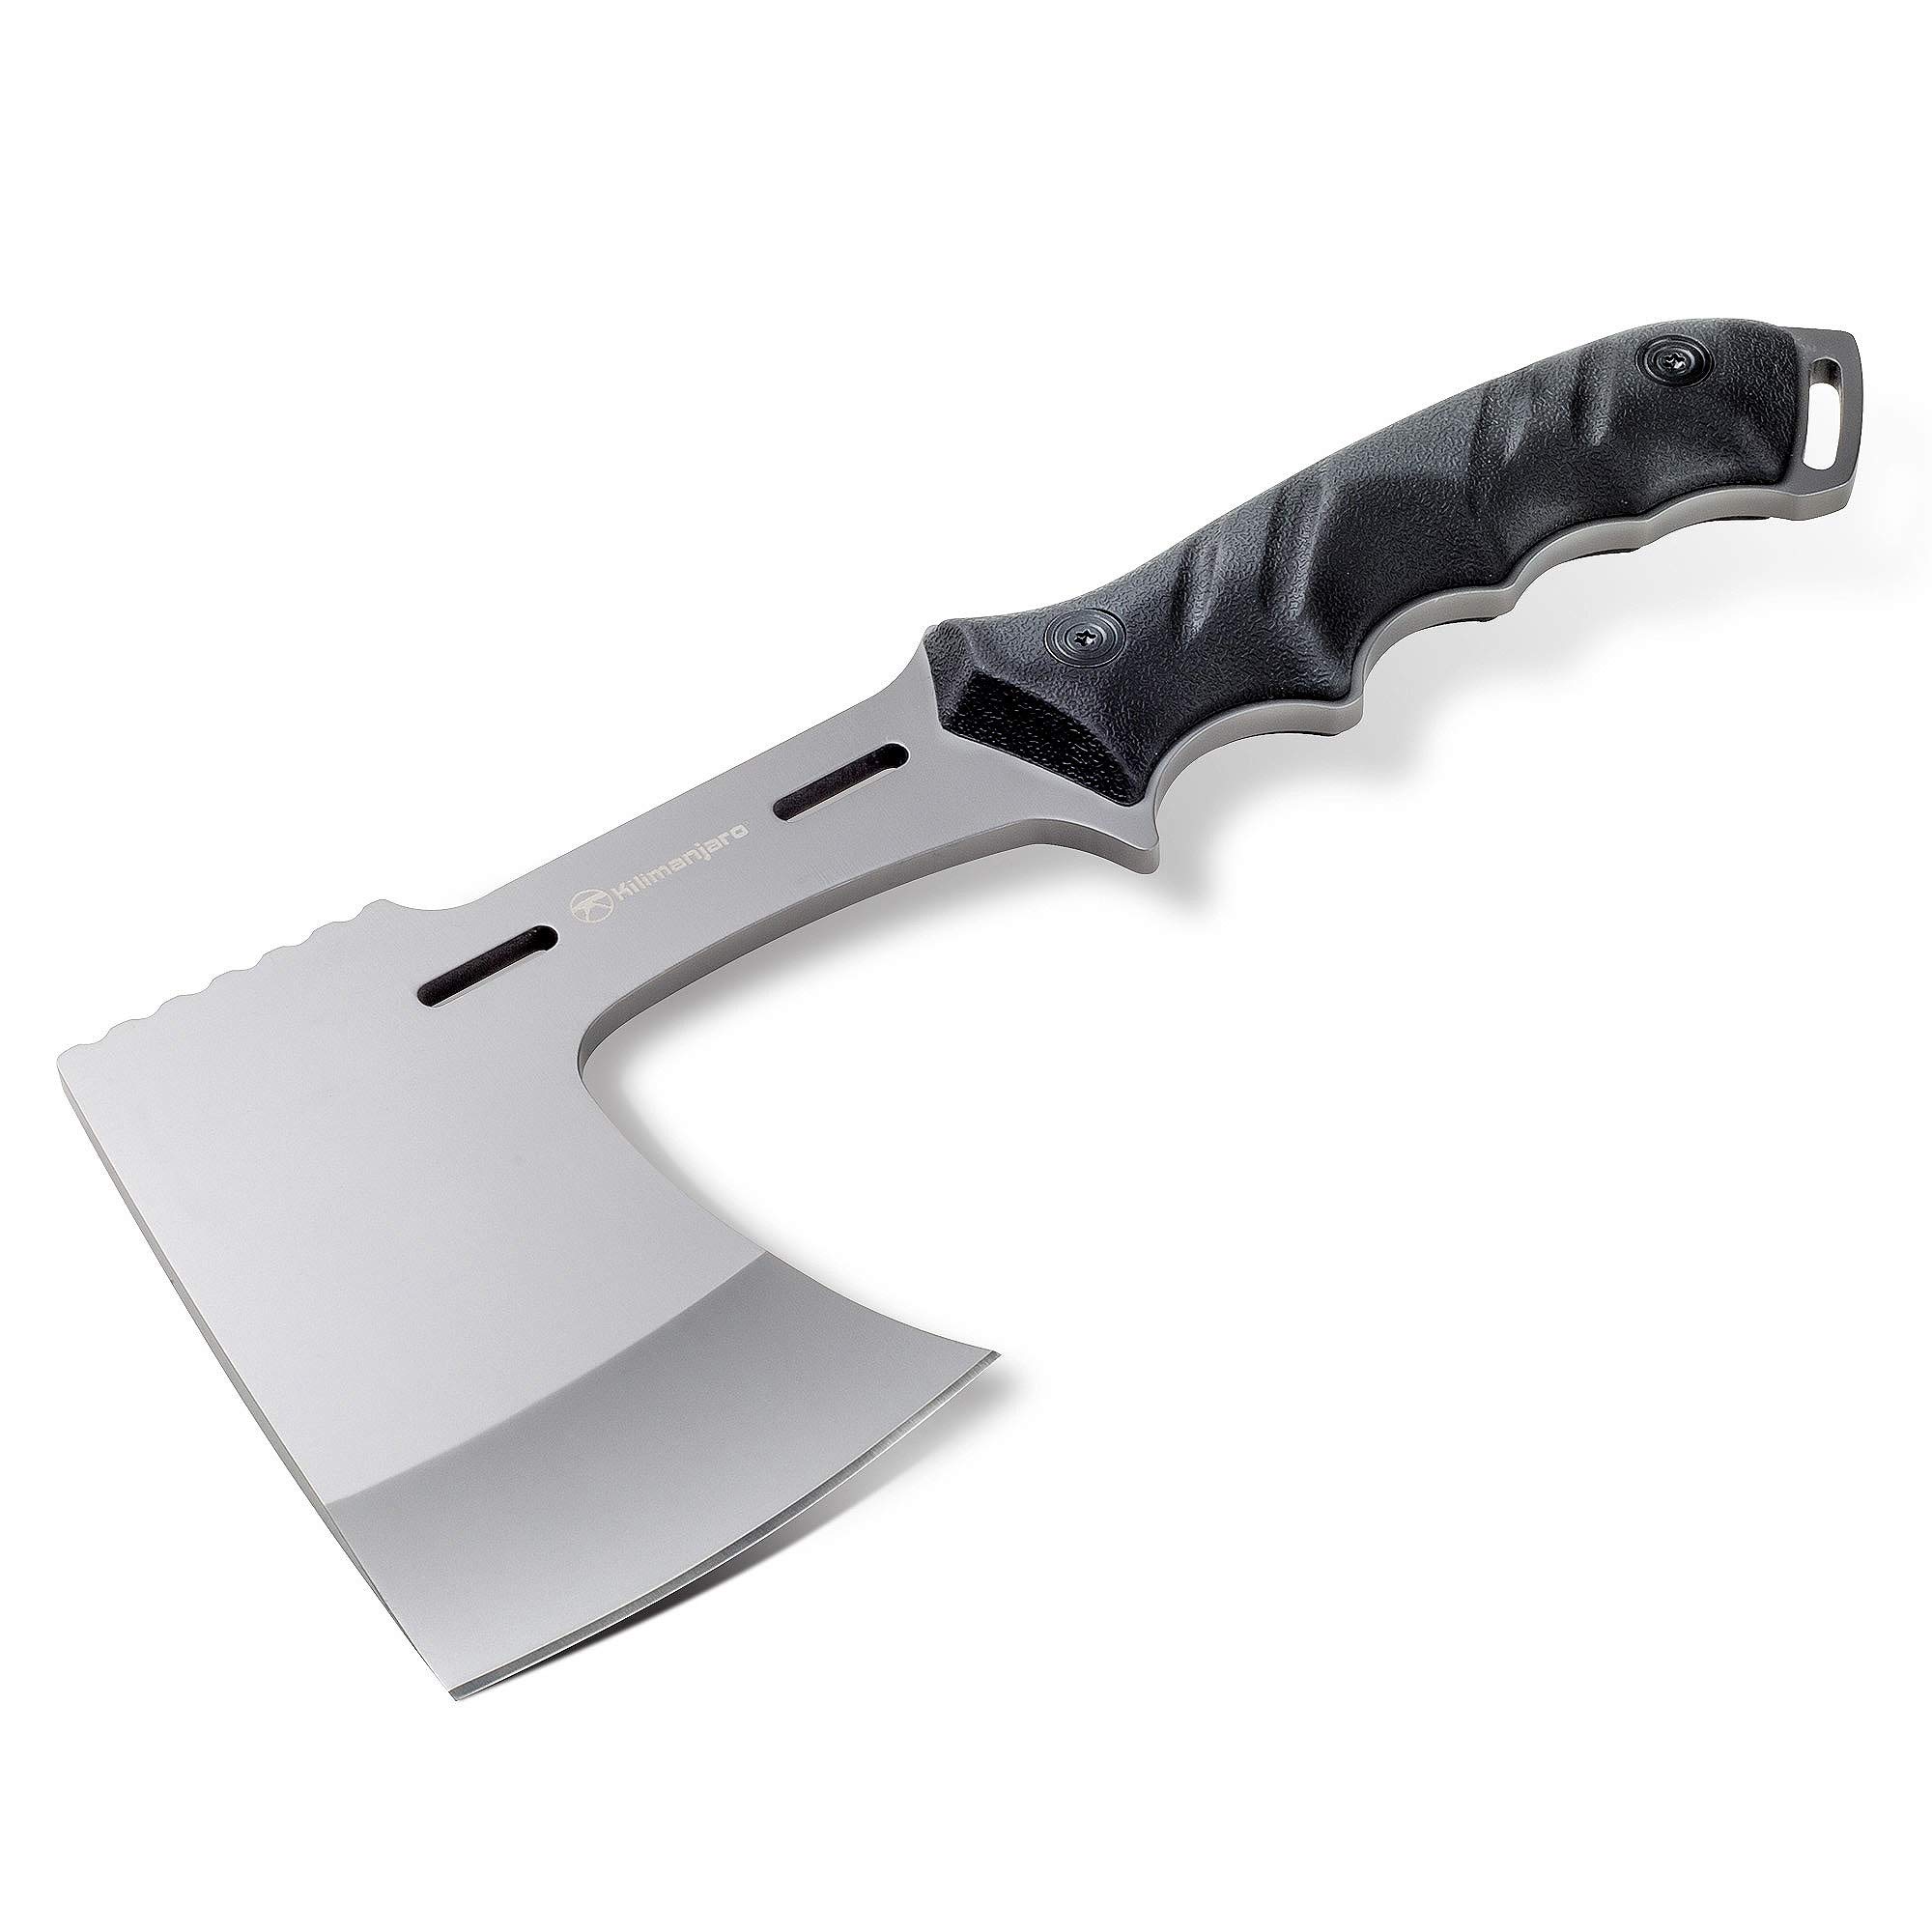 KILIMANJARO 10 INCH AXE WITH DOUBLE INJECTED GRIP (SHIRA)